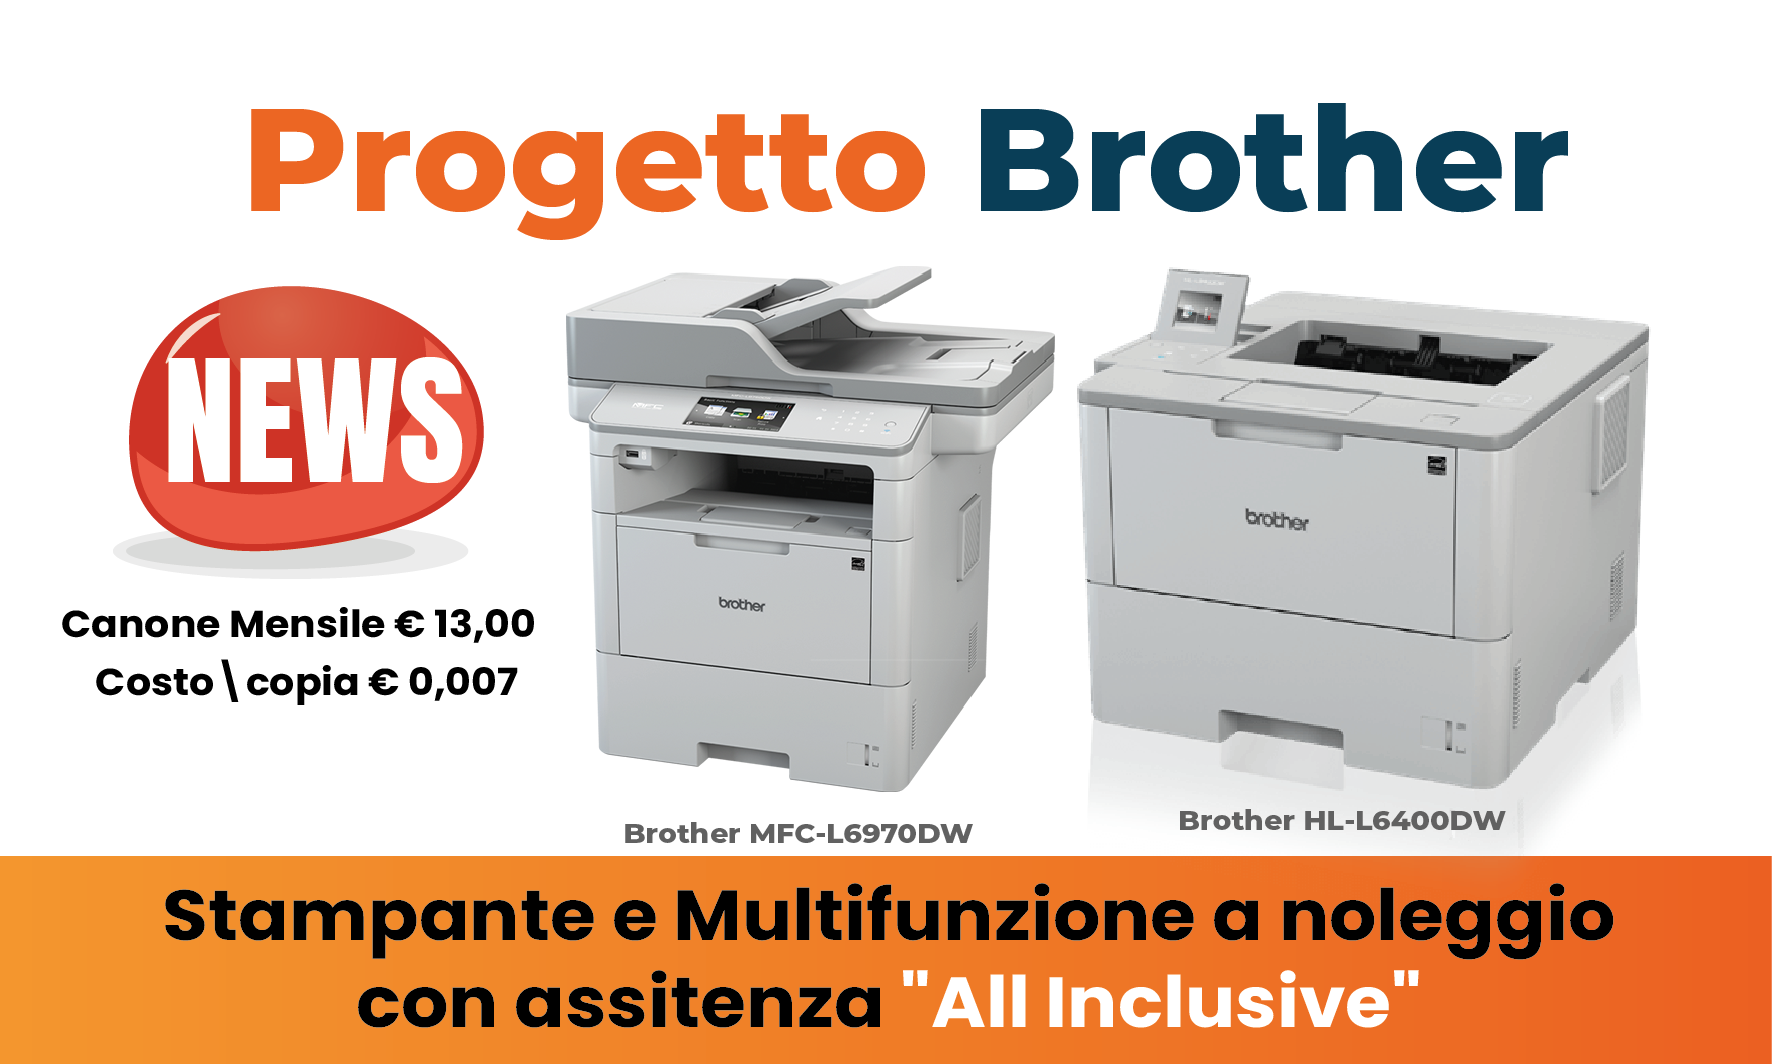 Progetto Brother!